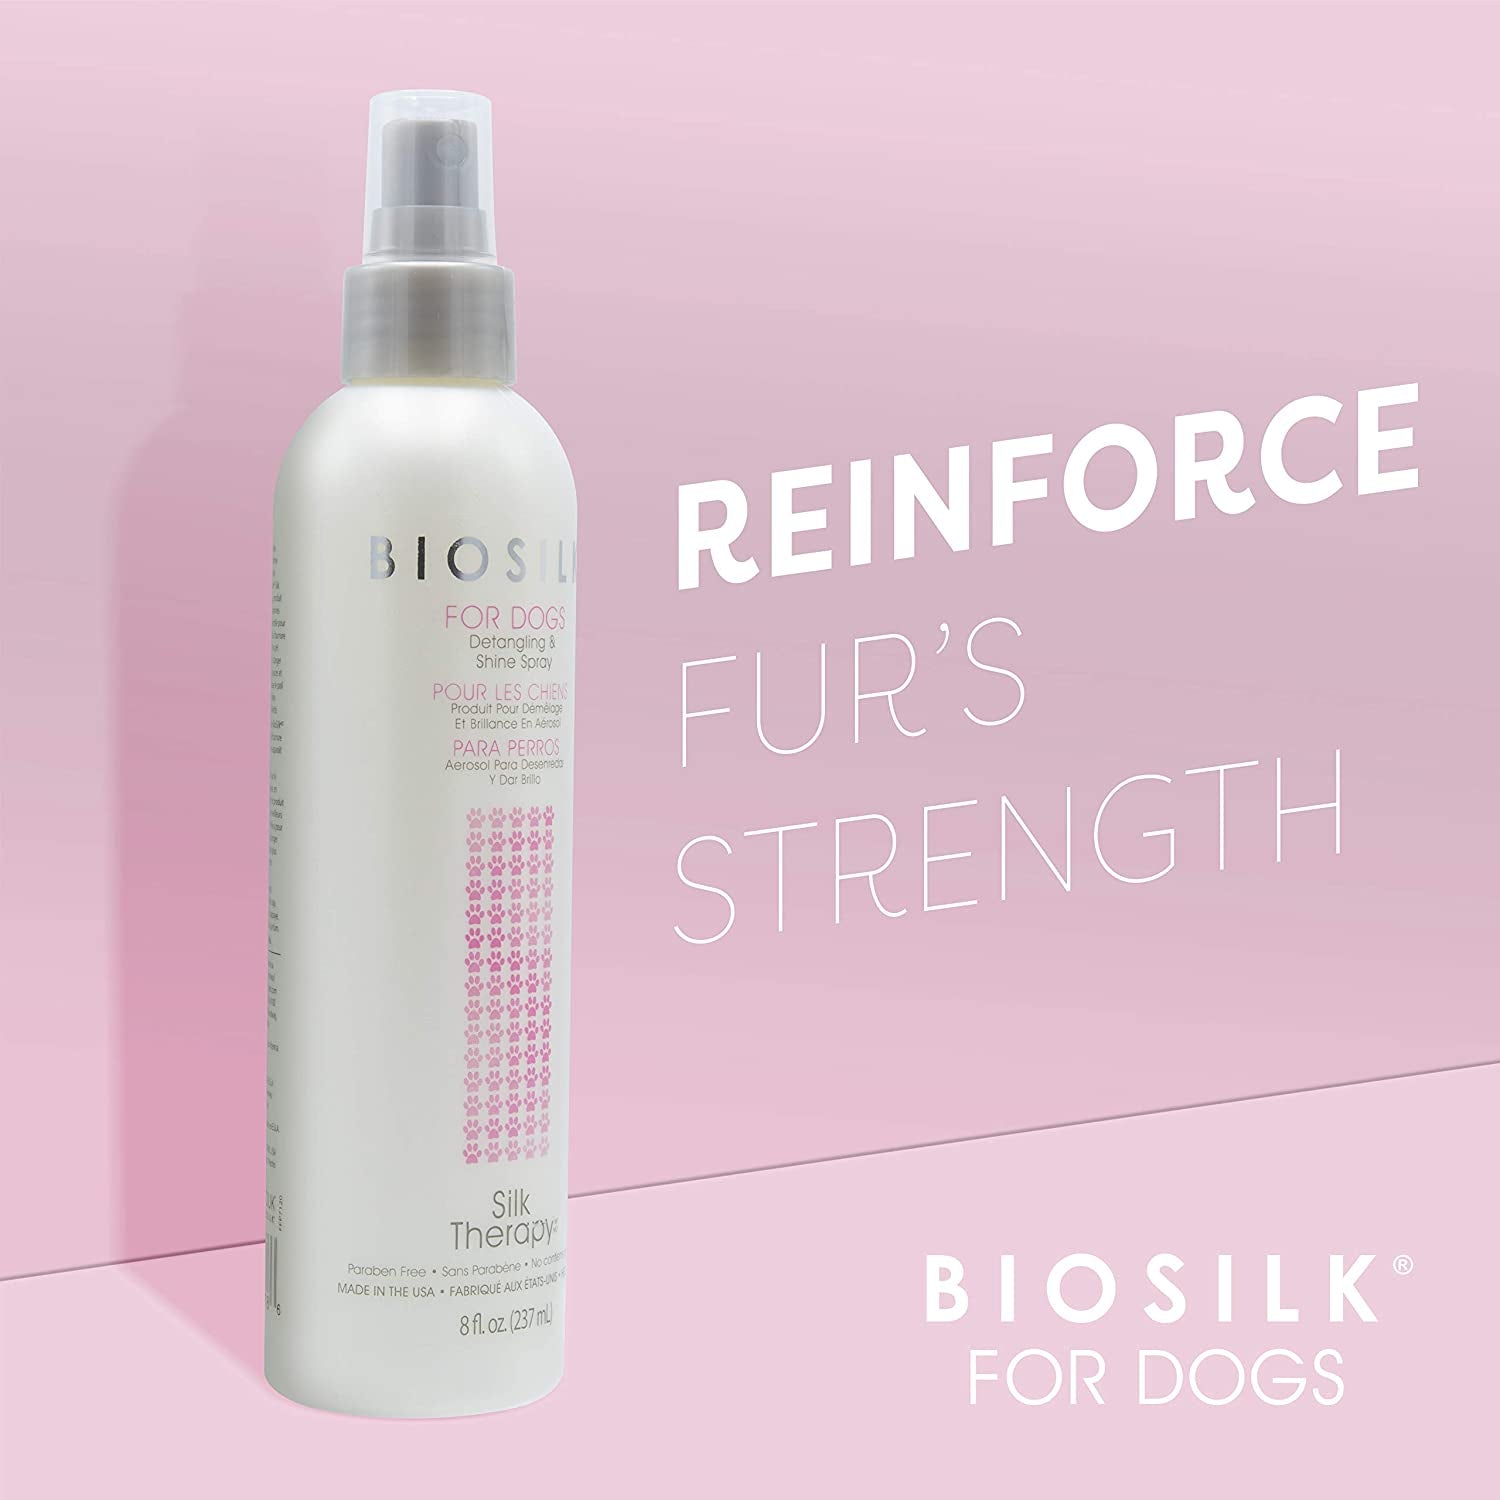 Biosilk for Dogs Silk Therapy Detangling plus Shine Mist for Dogs | Best Detangling Spray for All Dogs & Puppies for Shiny Coats and Dematting | 8 Oz Bottle (Packaging May Vary),White